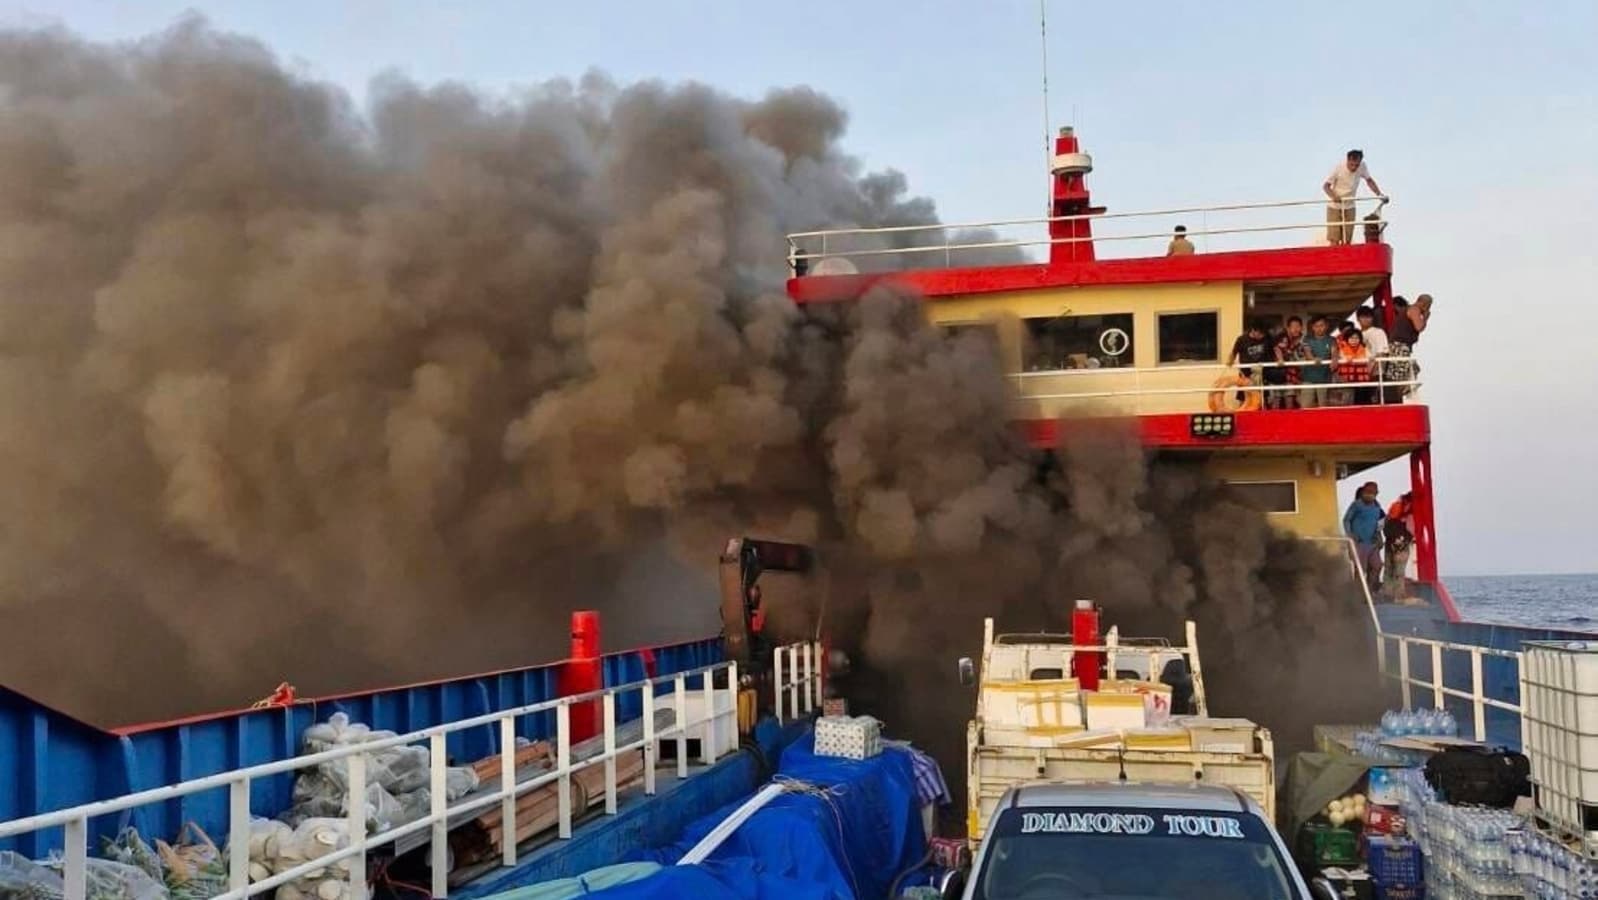 Video: Overnight ferry catches fire in Thailand, 108 people rescued